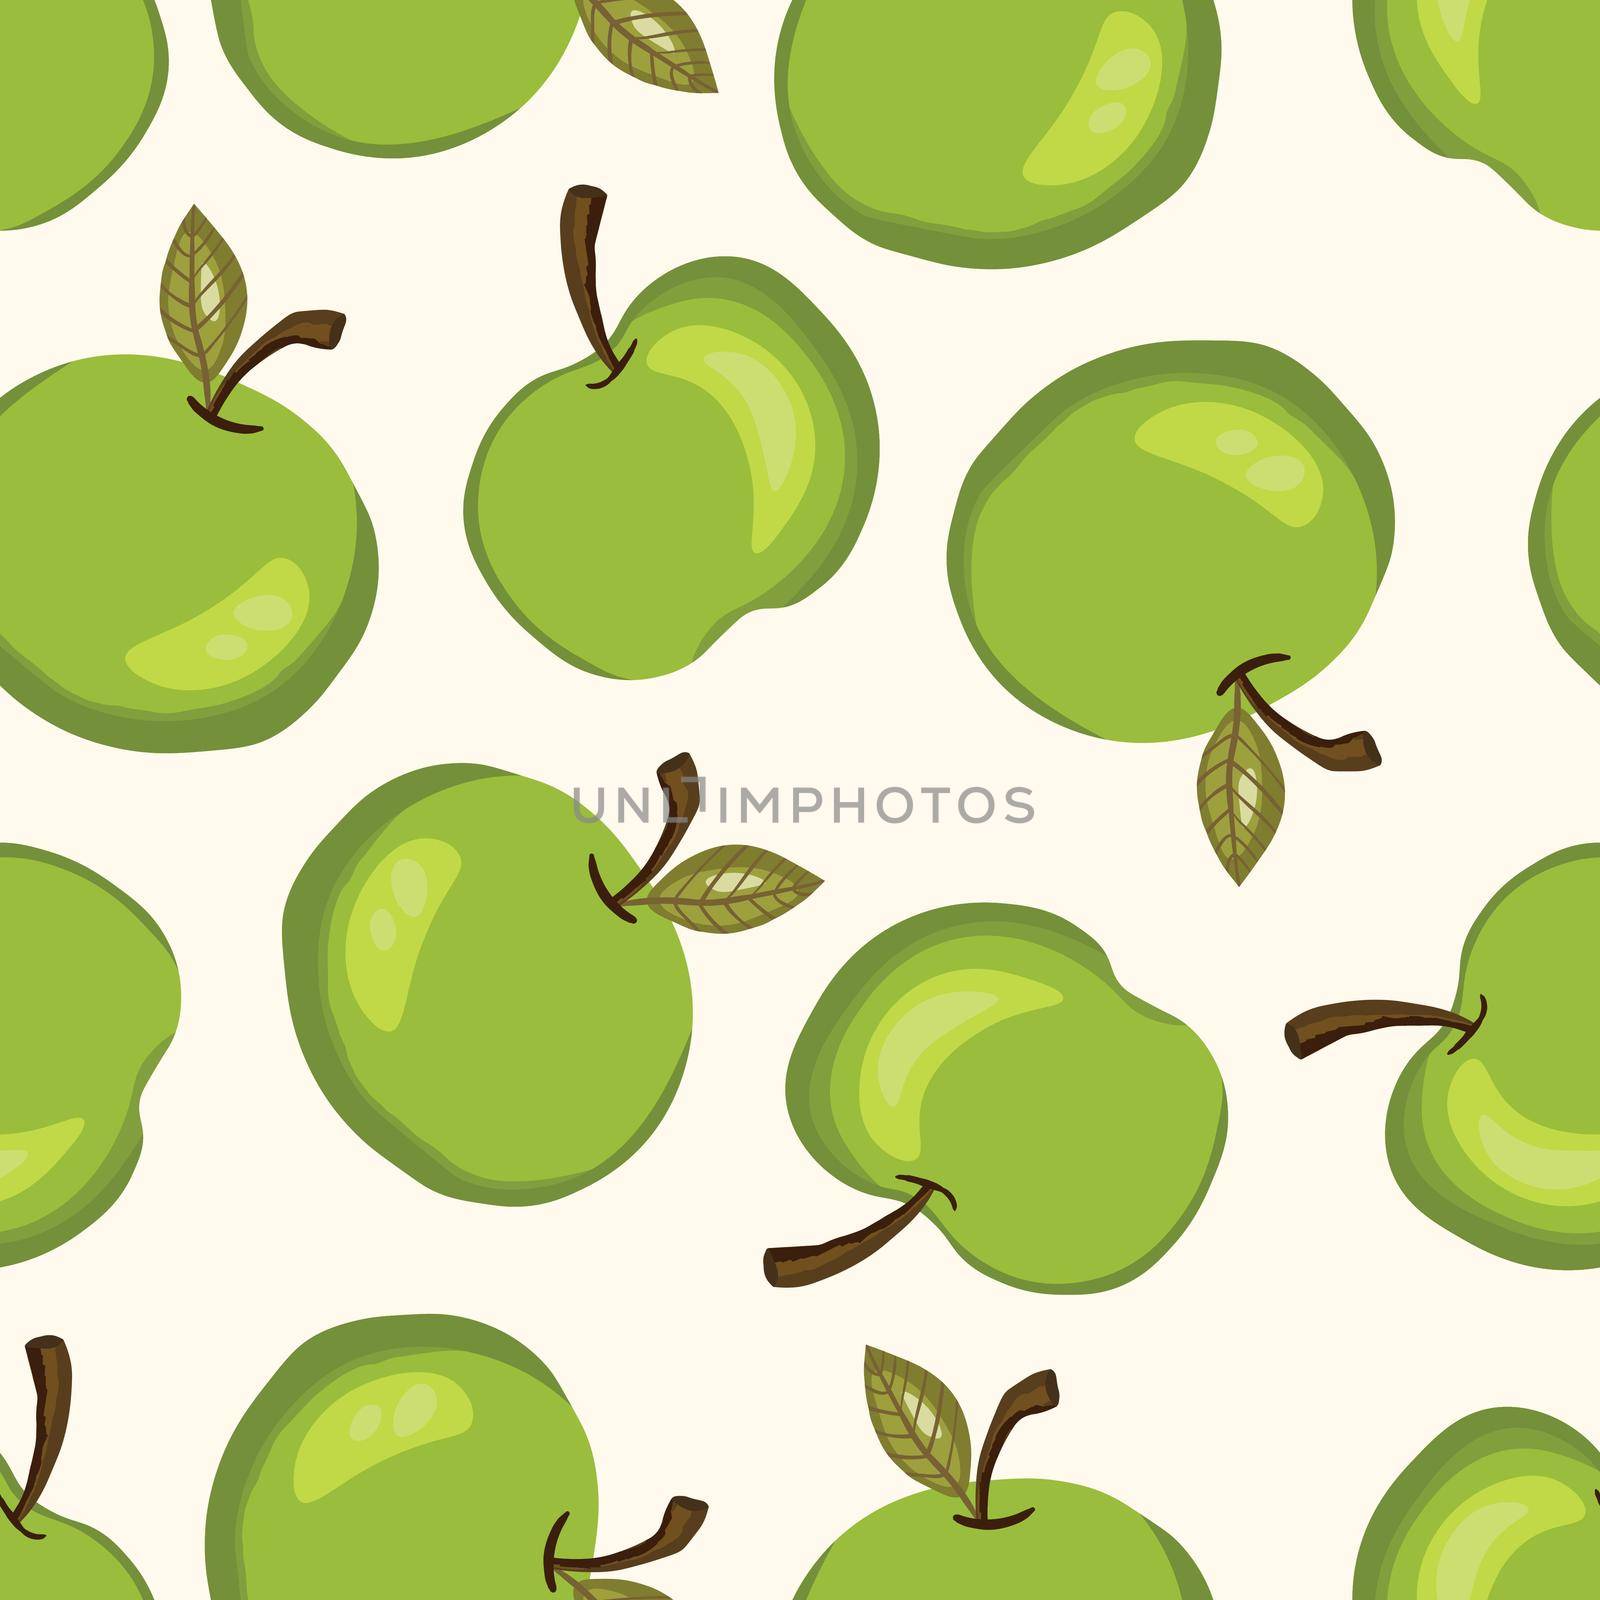 Seamless pattern with apple on white background. Natural delicious fresh ripe tasty fruit. Vector illustration for print, fabric, textile, other design. Stylized apples with leaves. Food concept by allaku